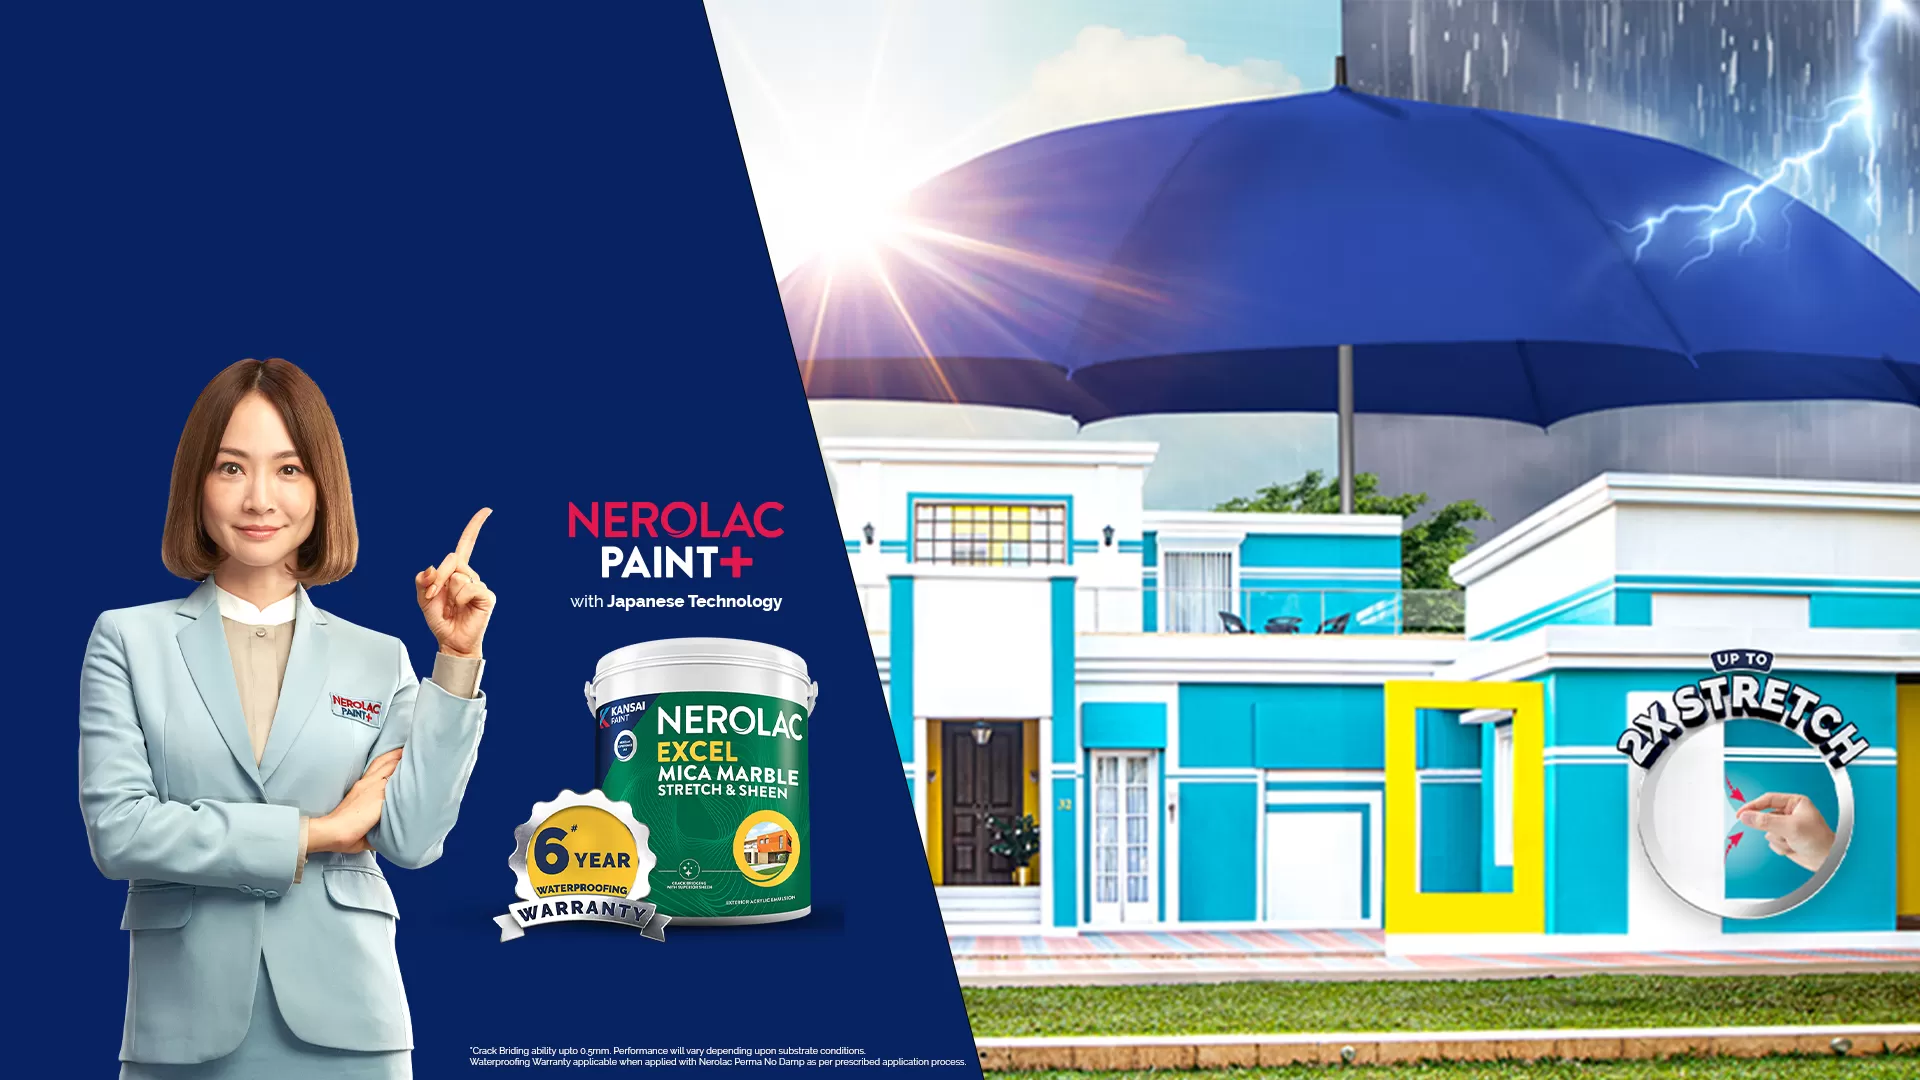 Distribution Channel of Paints With particular reference to Kansai Nerolac Paints Ltd